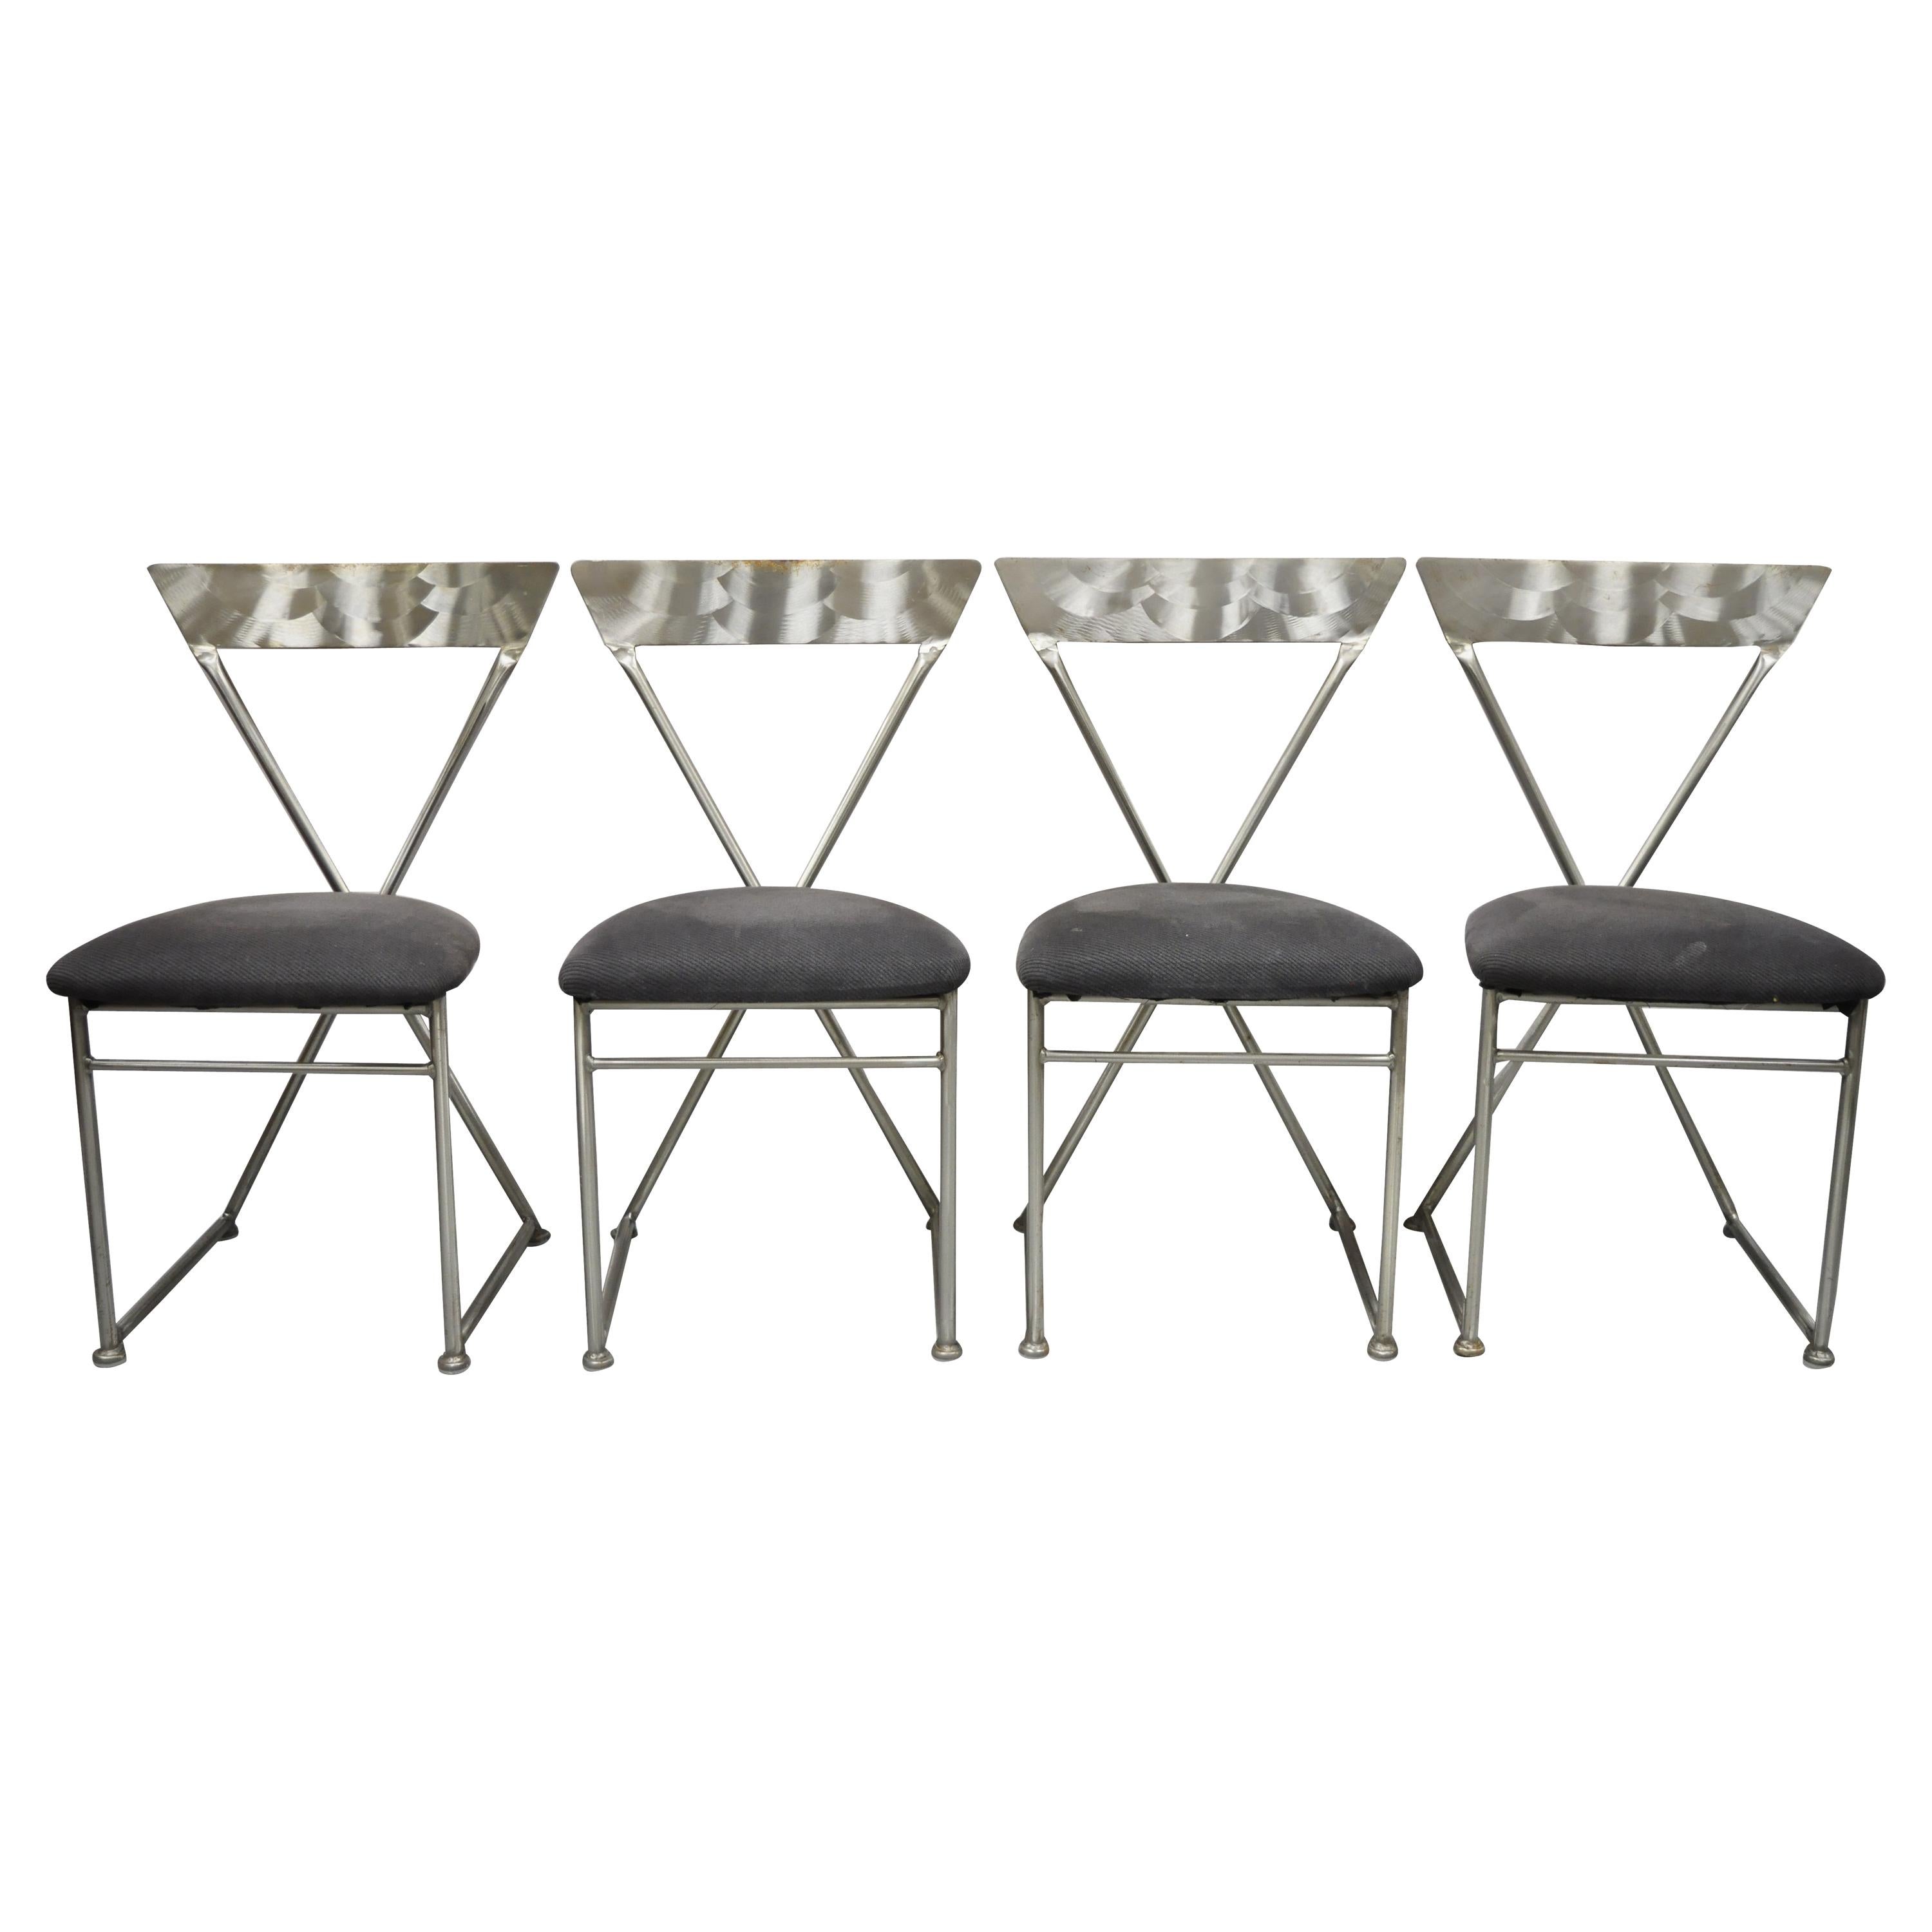 Shaver Howard Italian Modernist Brushed Steel Metal Dining Chairs, Set of 4